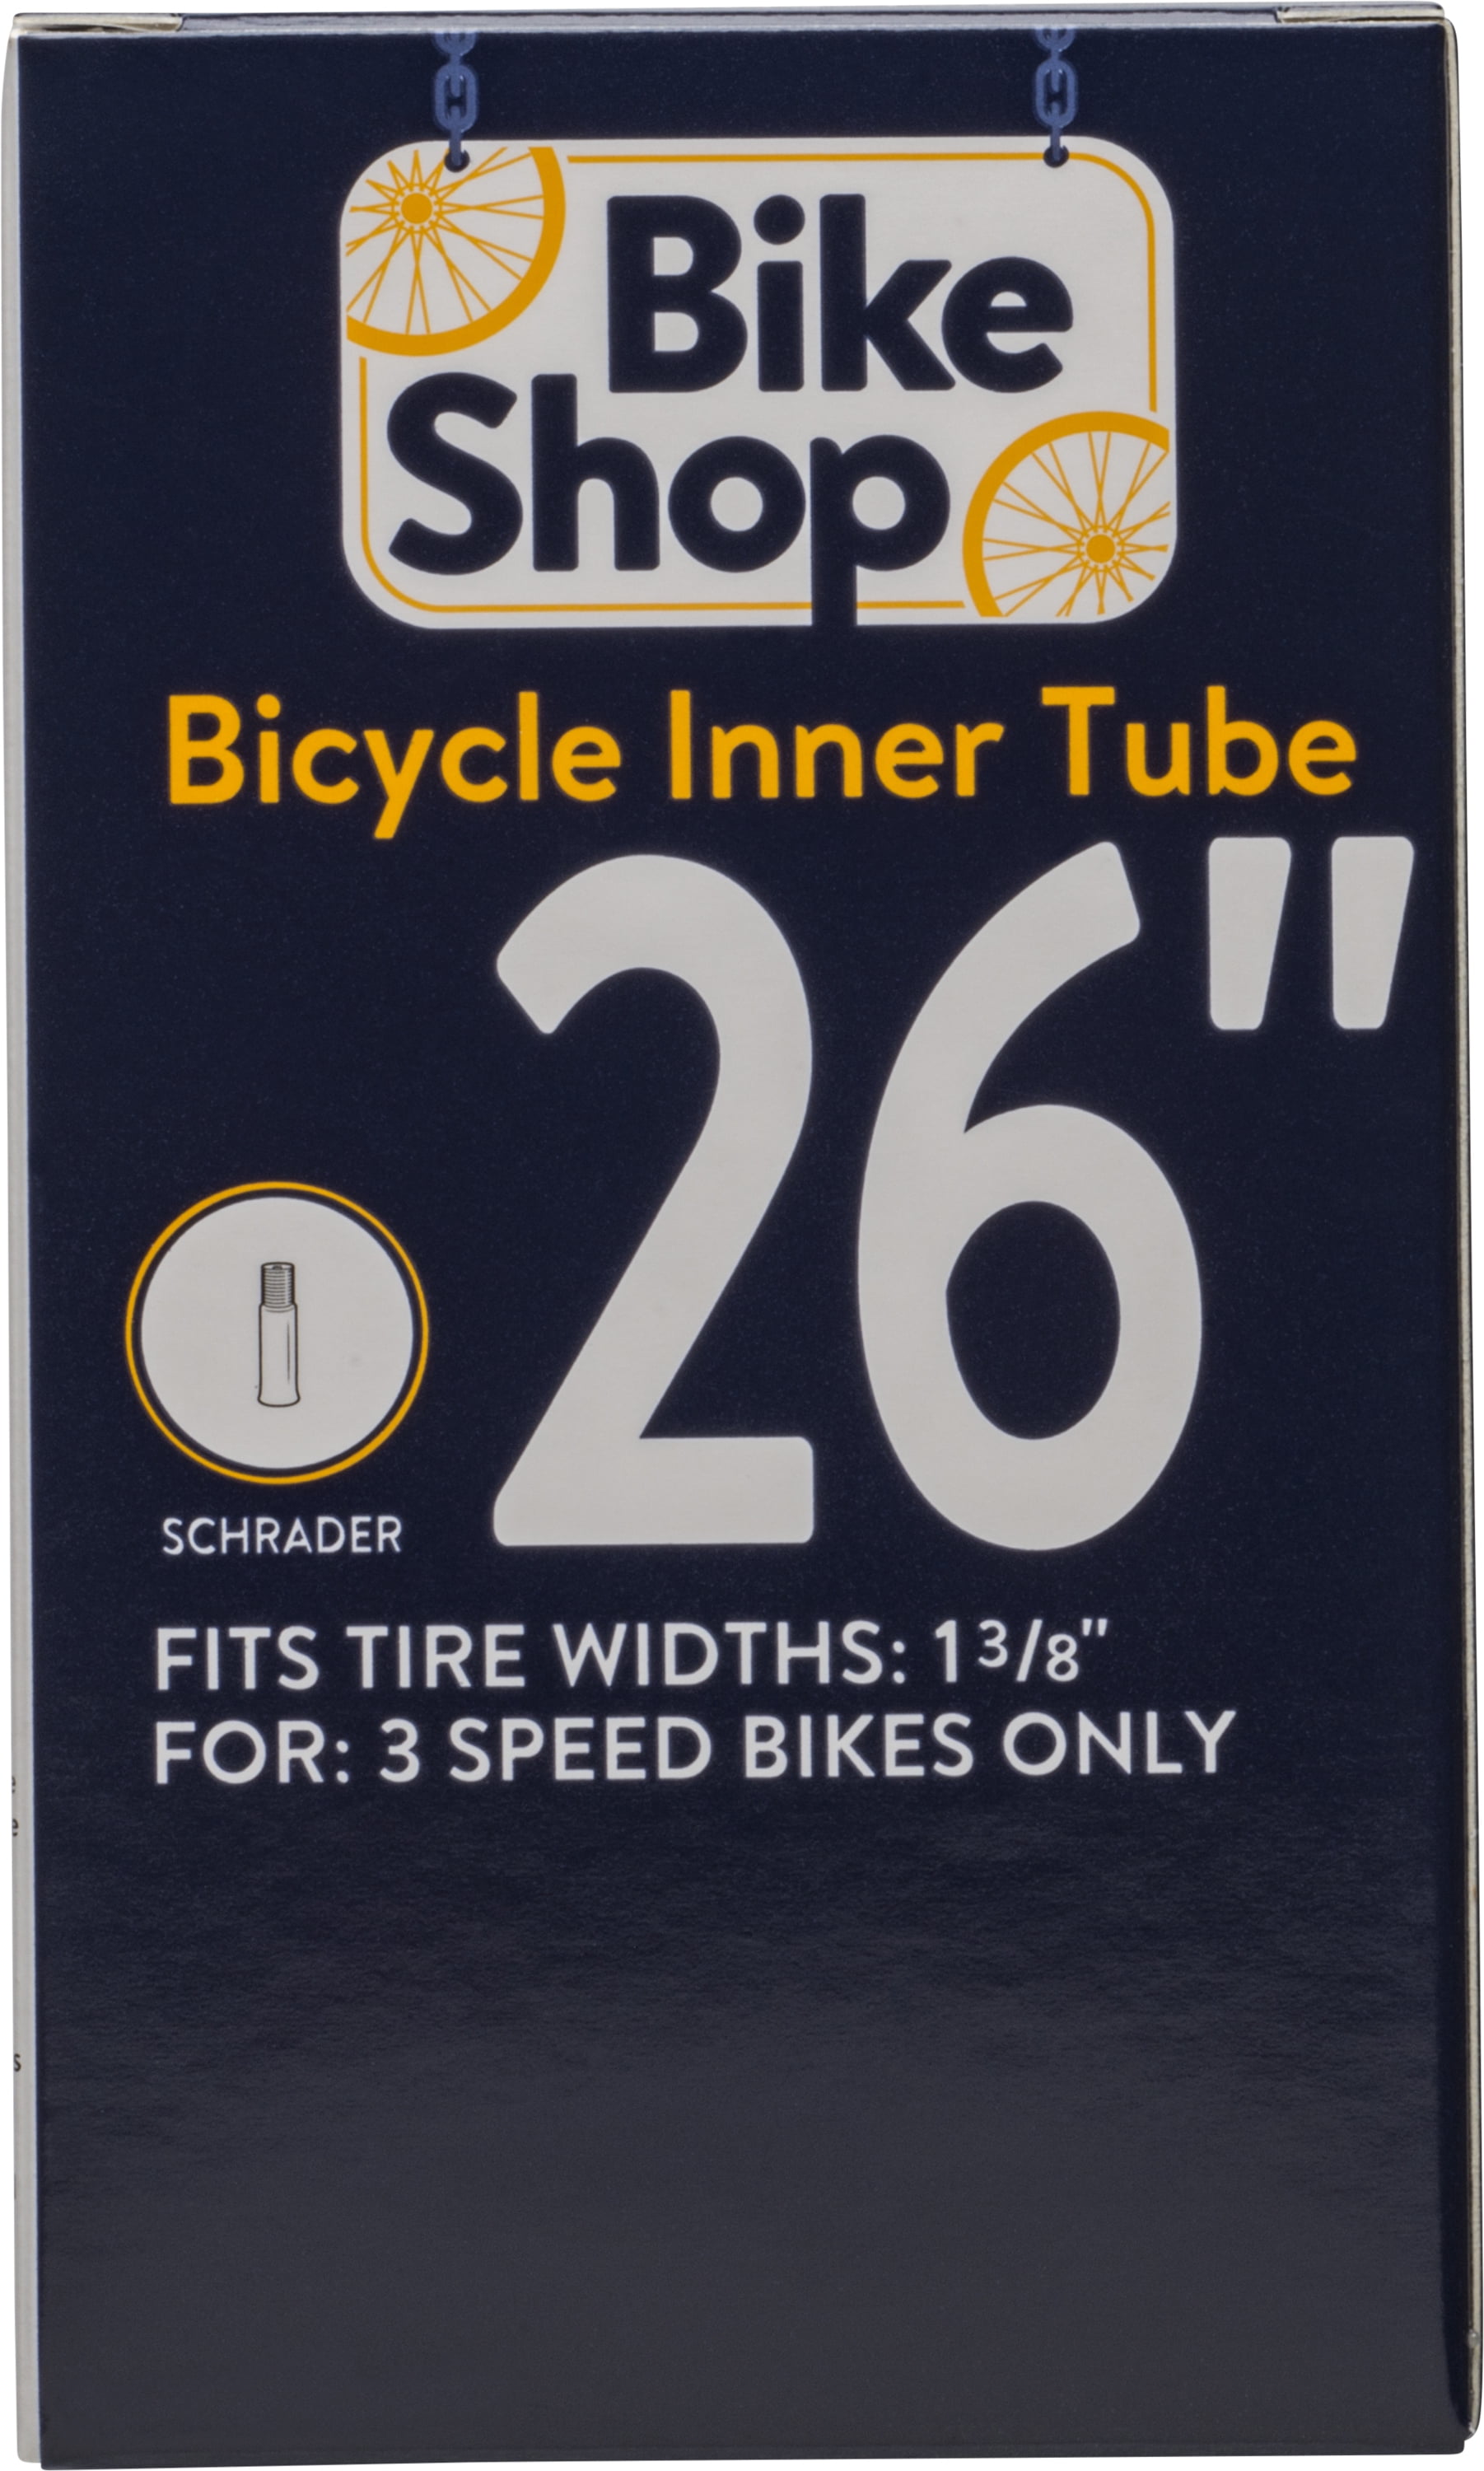 Bell Self Sealing Standard Valve Bicycle Tube 26" X 1-3/8" 3 Speed Only for sale online 